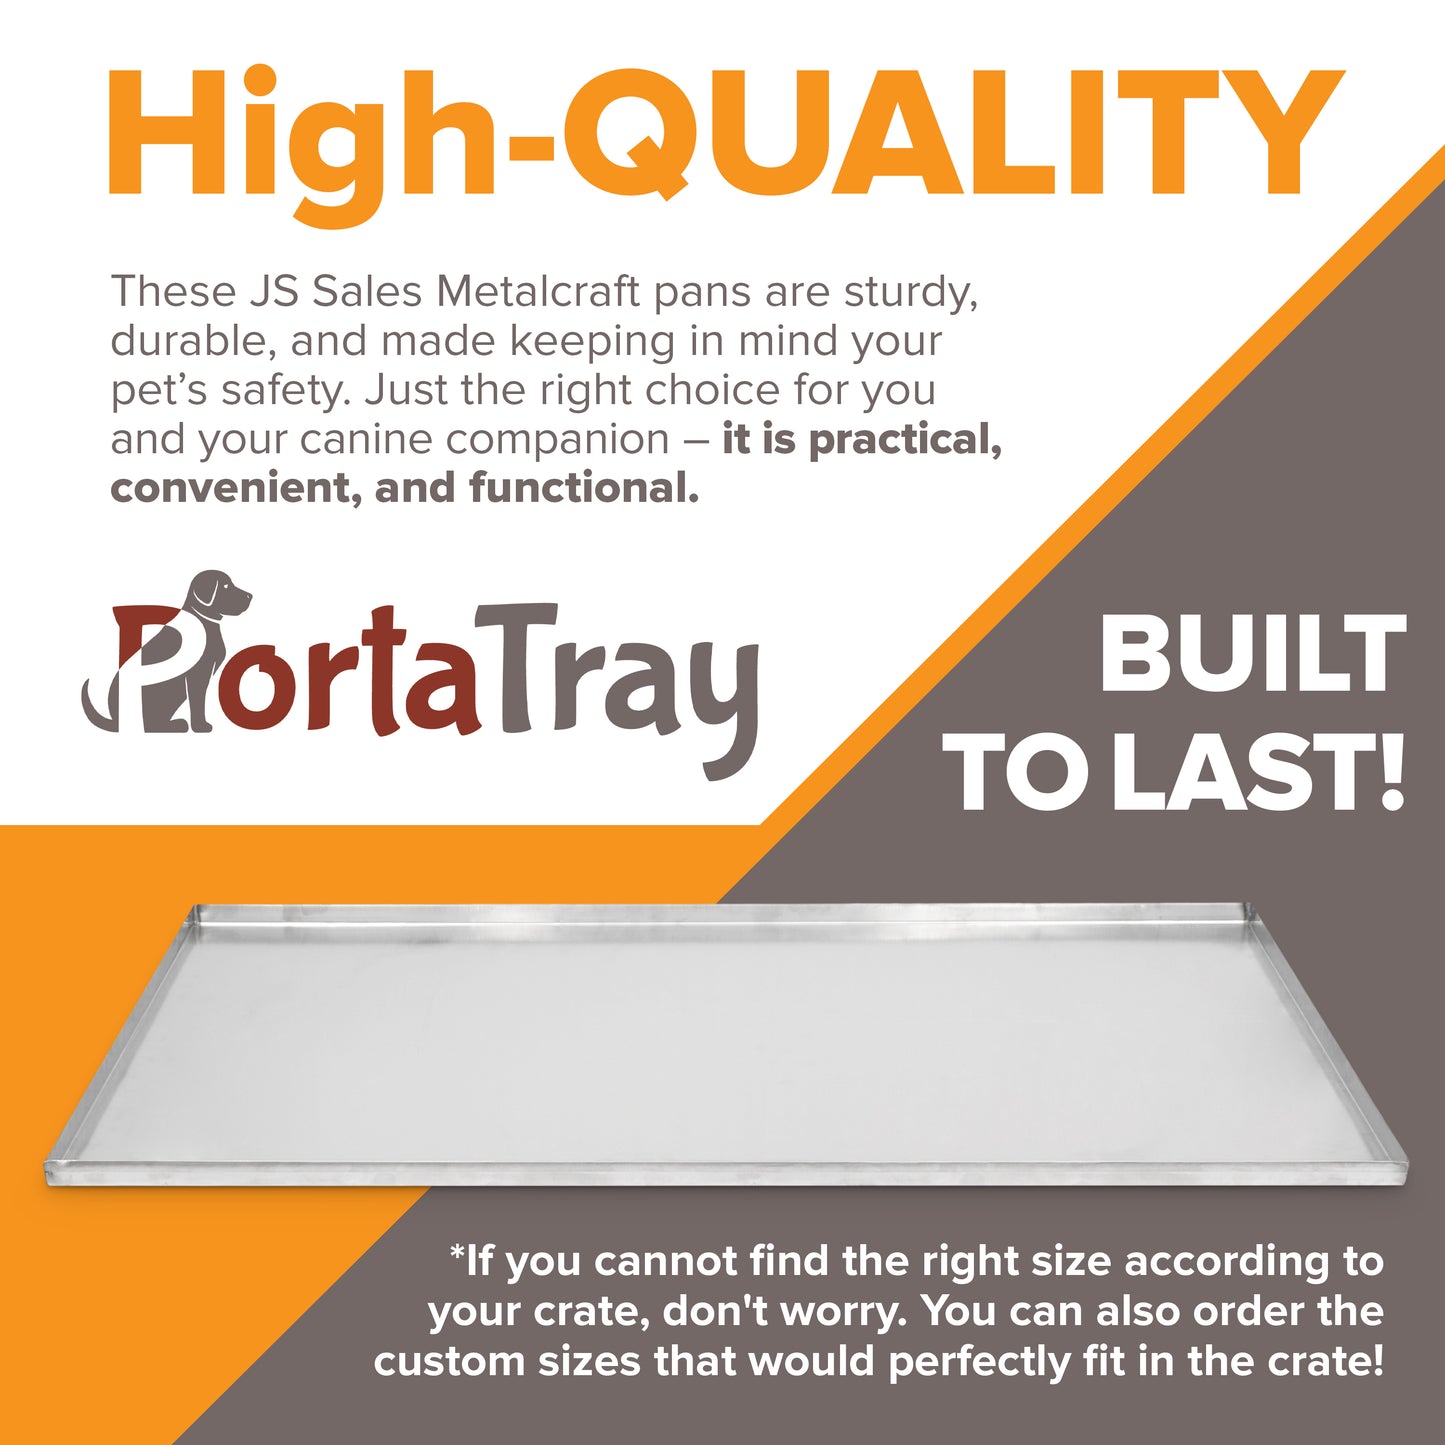 PortaTray - Frisco Replacement Dog Kennel Tray - Chew Proof & Crack Proof Metal Multipurpose Tray